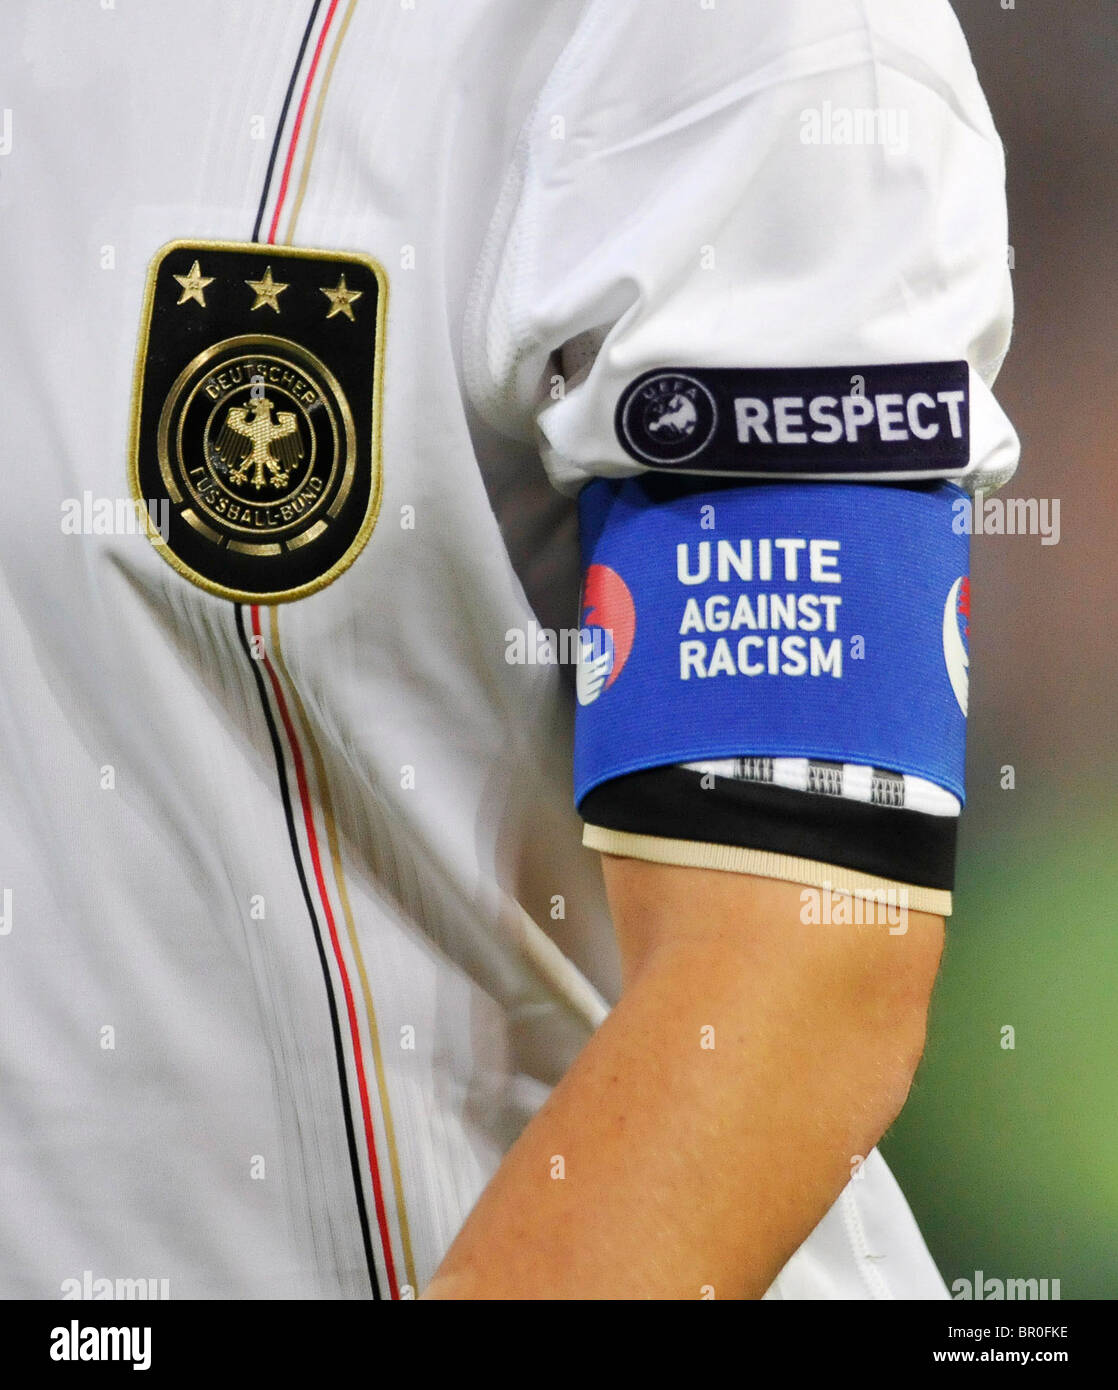 Football Racism High Resolution Stock Photography and Images - Alamy